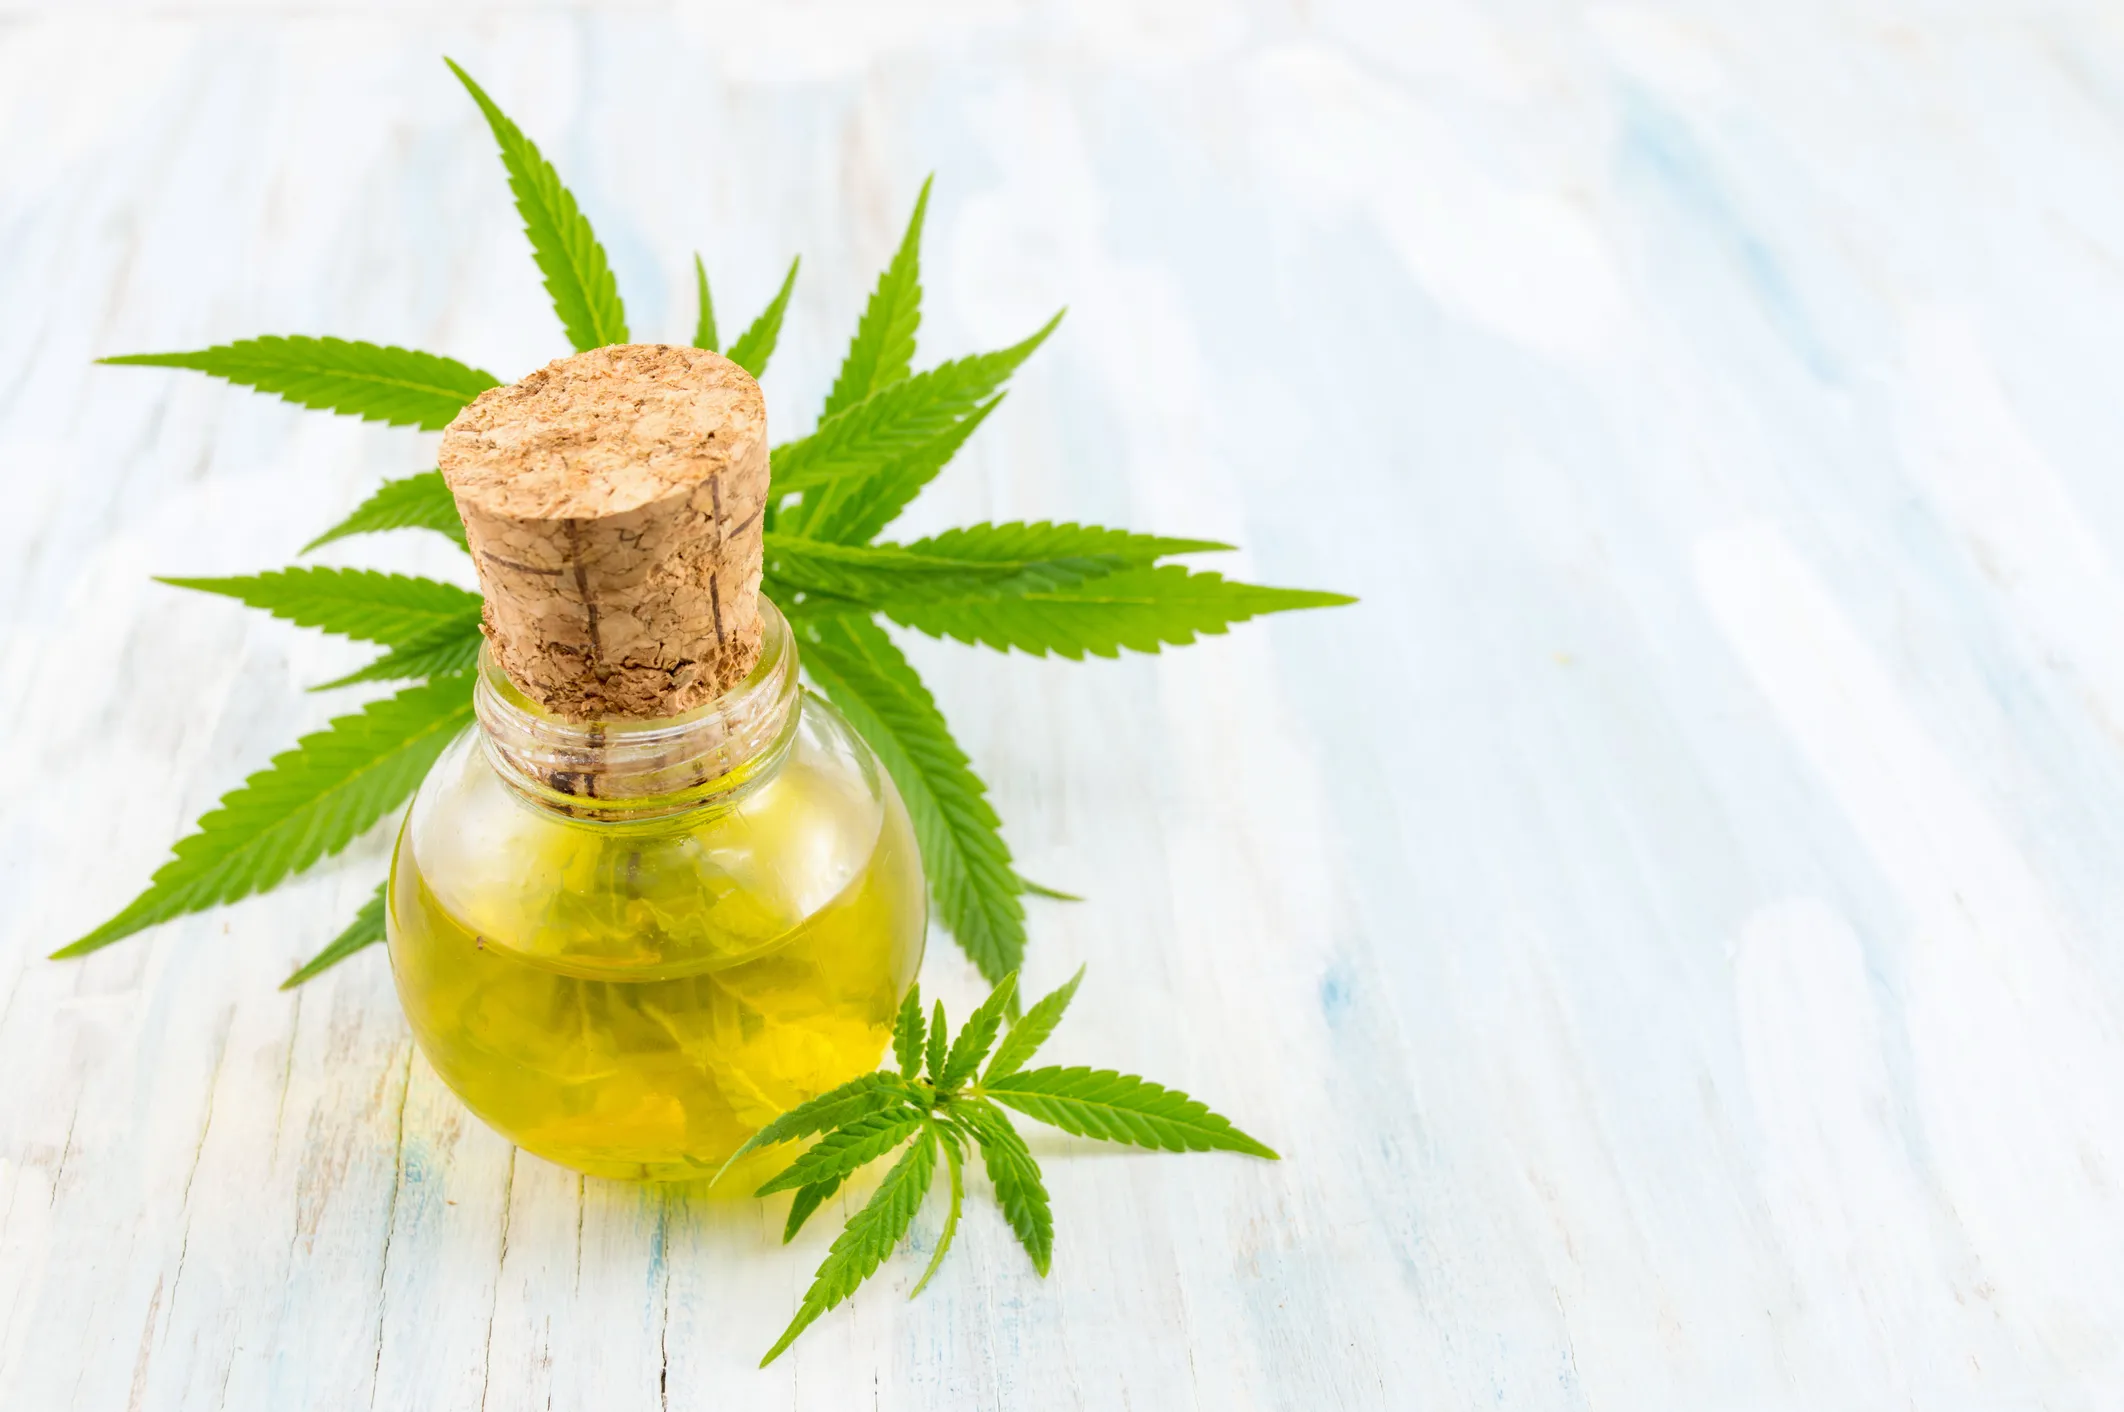 HOW LONG DOES CBD OIL STAY IN YOUR SYSTEM